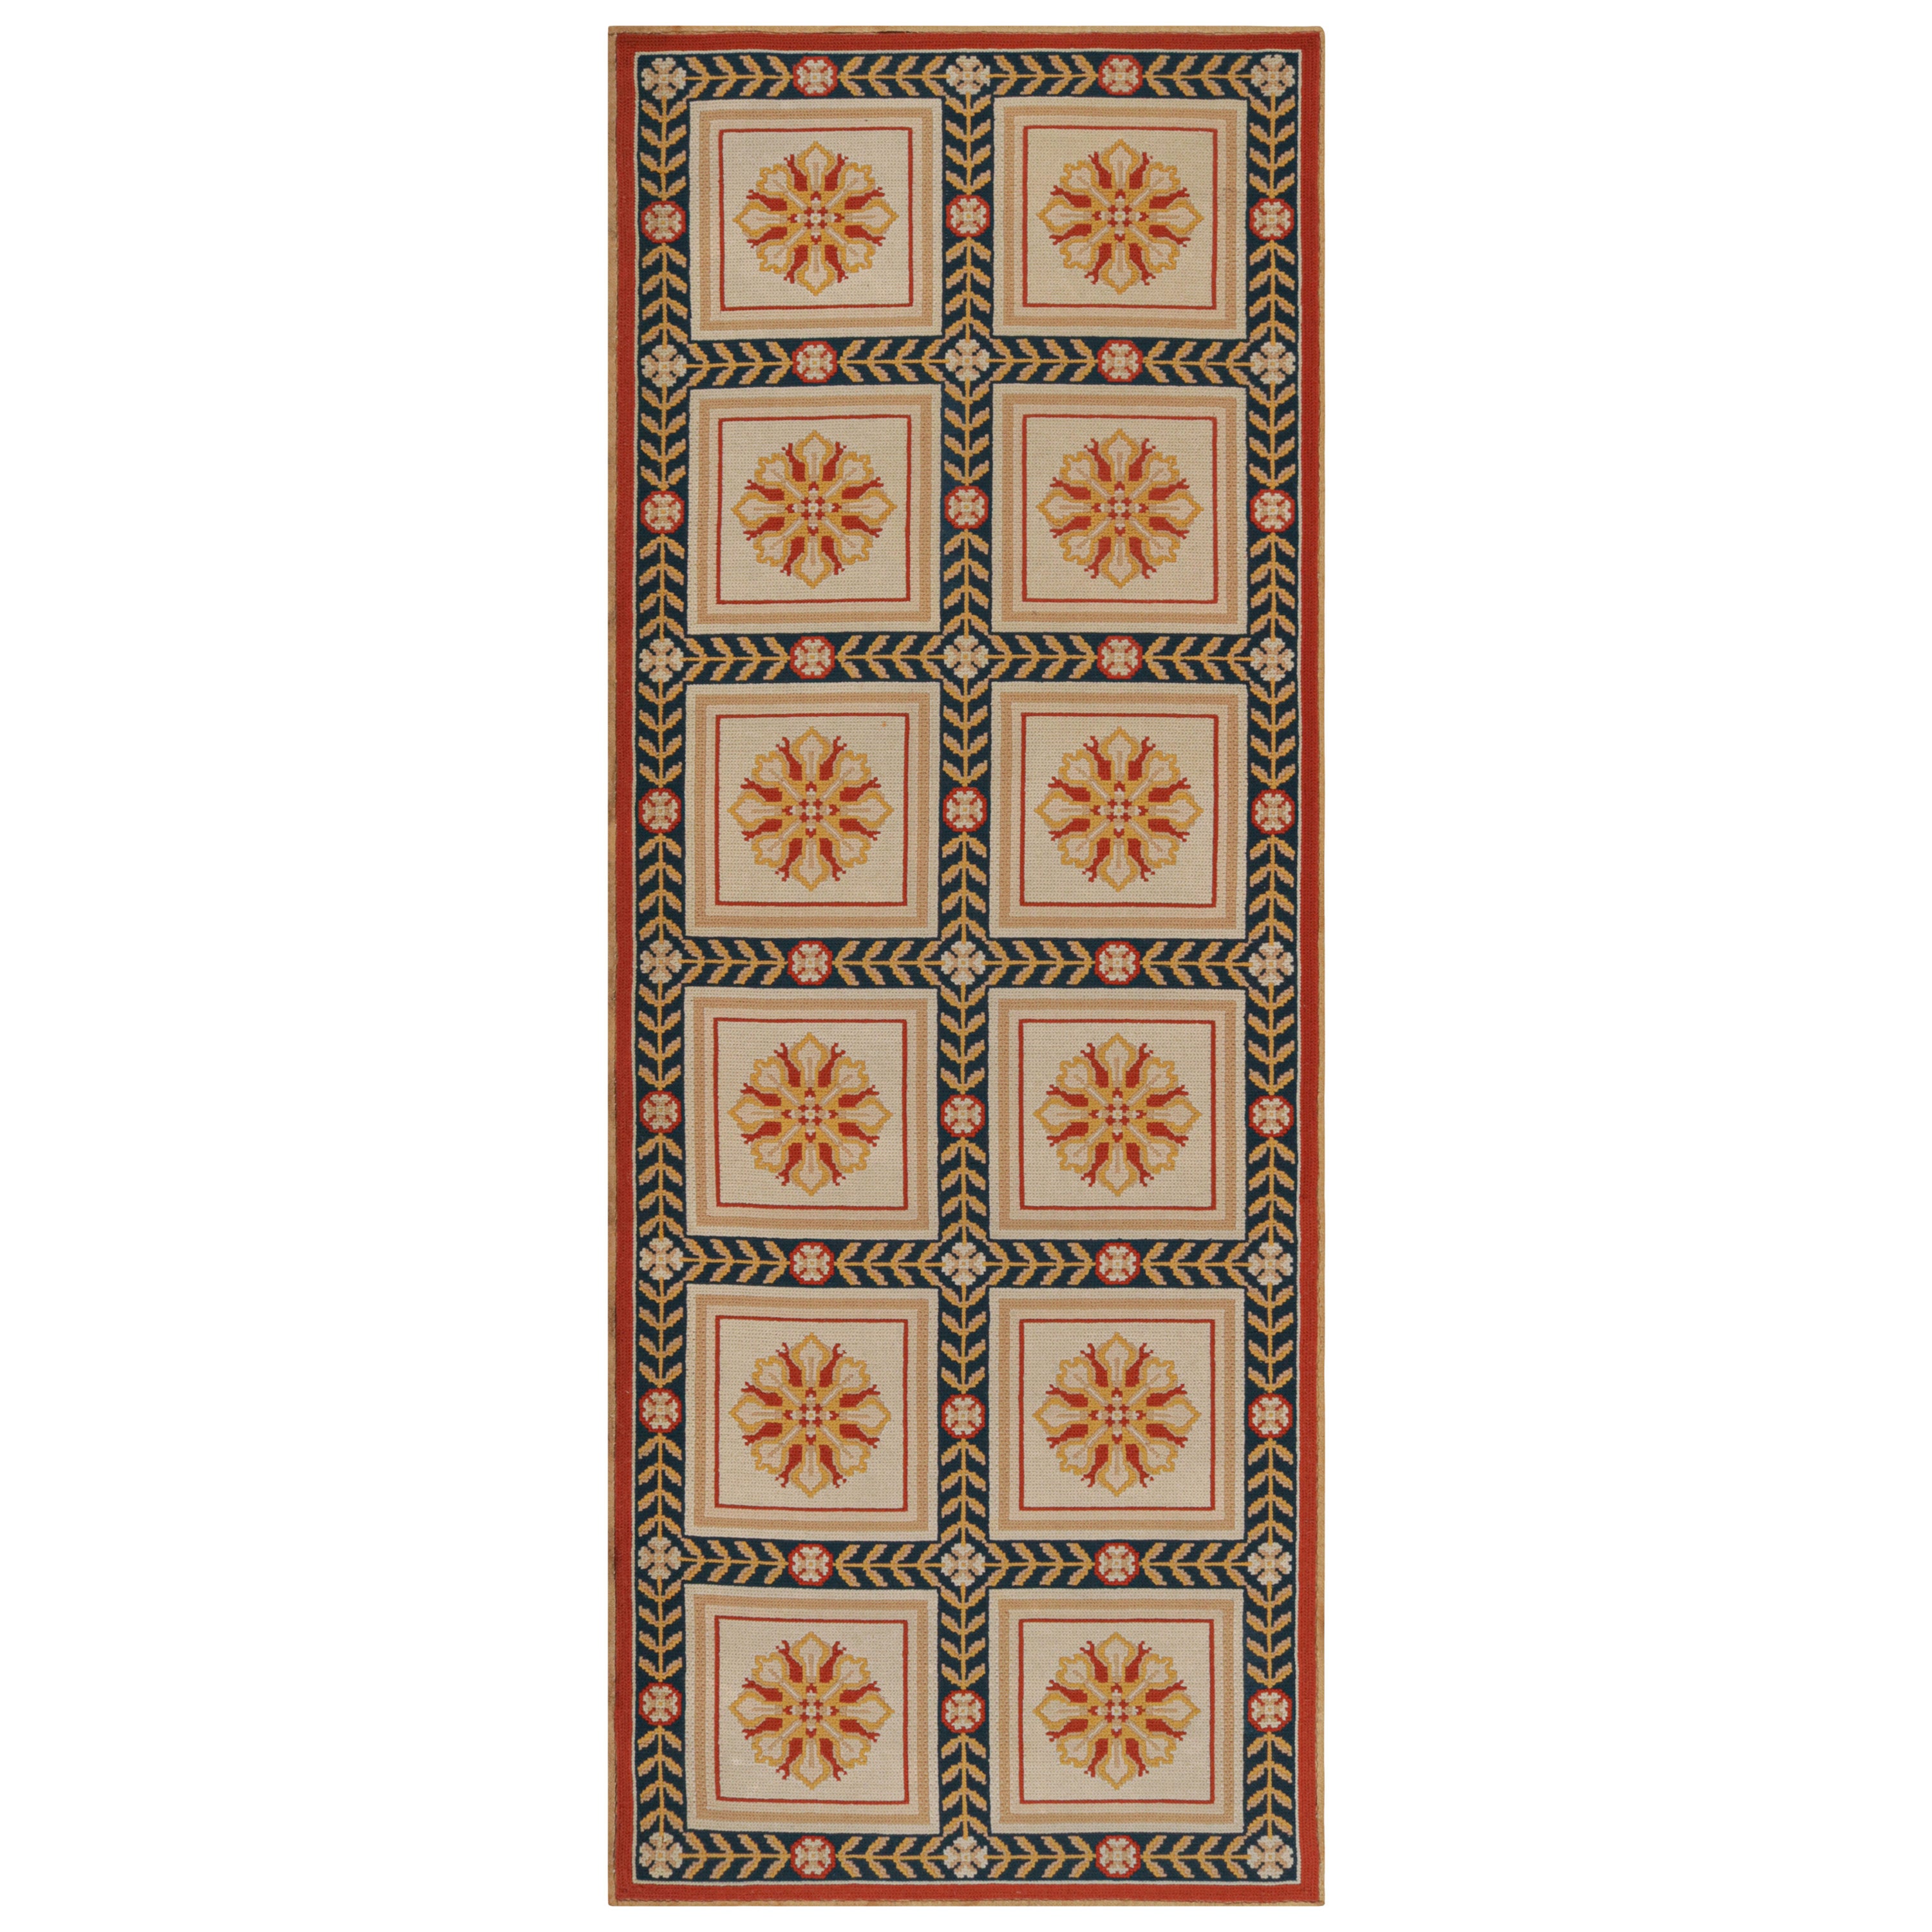 Antique Arraiolos Needlepoint Runner With Floral Medallions, From Rug & Kilim For Sale